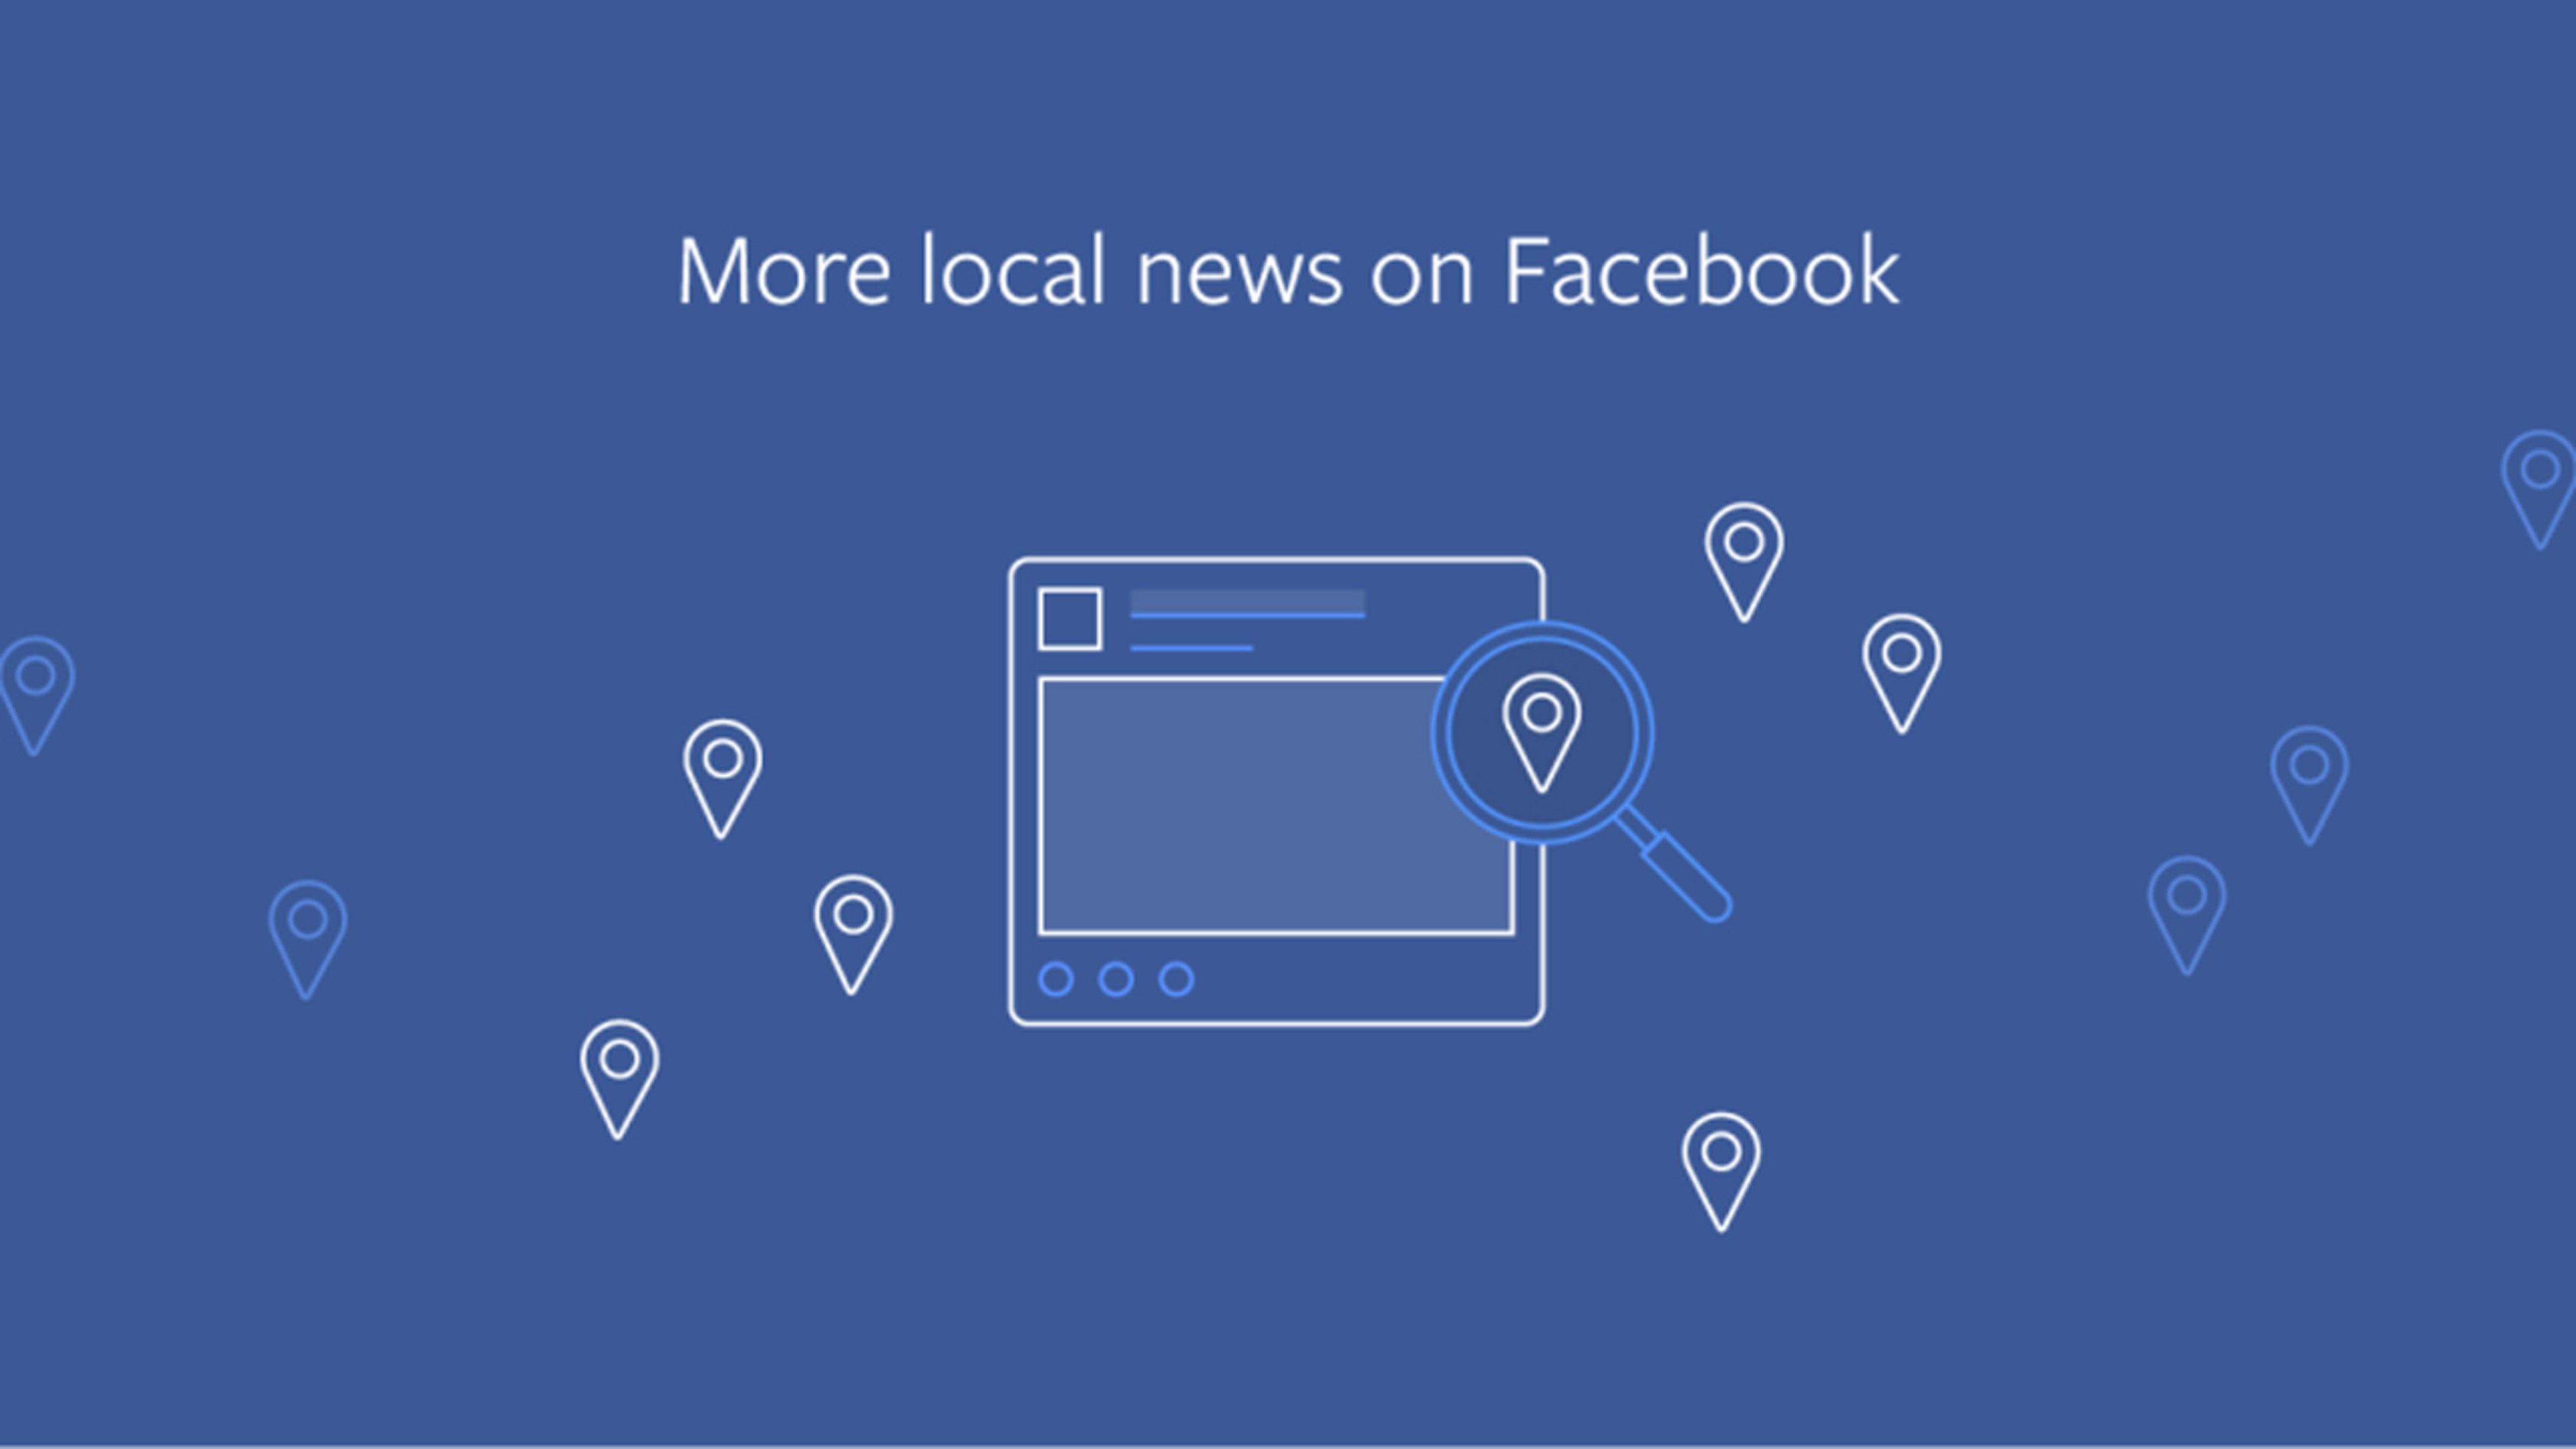 Facebook just dumped national news for local news